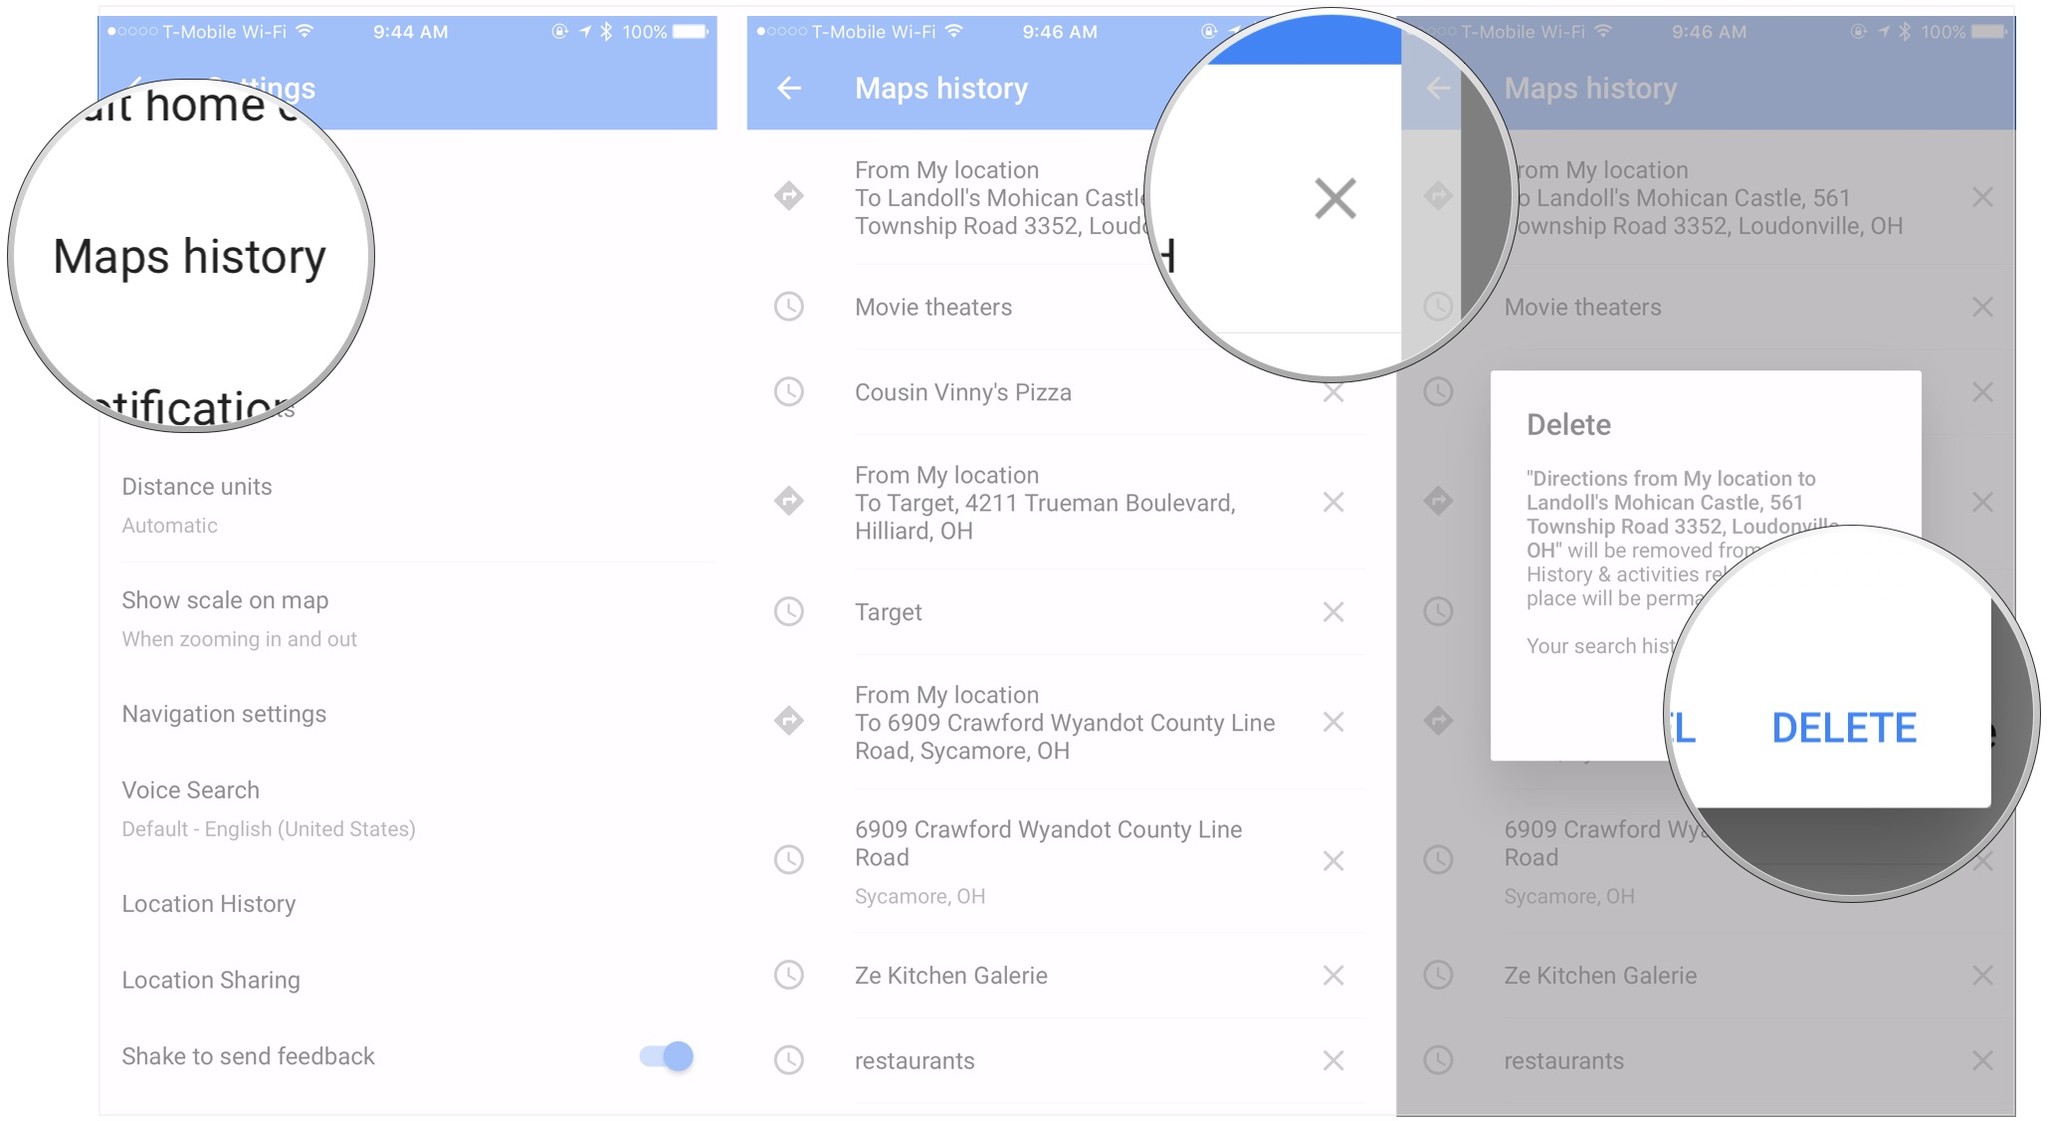 How to delete your search history and prior destinations